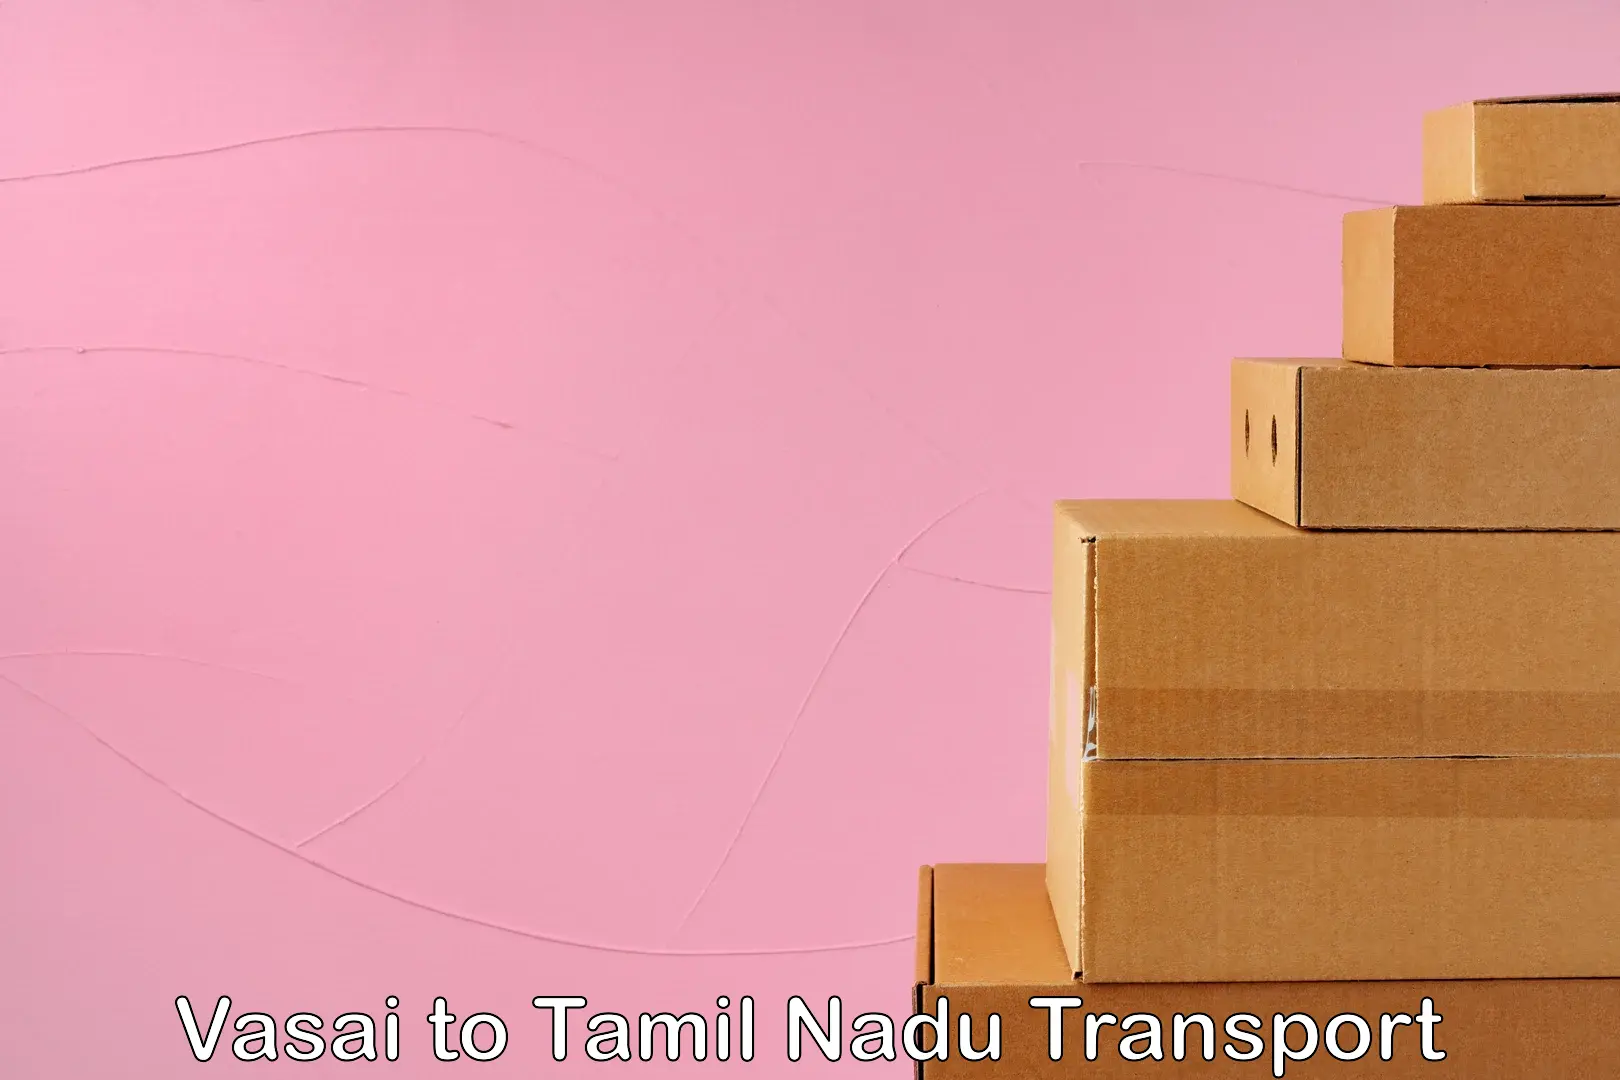 Air freight transport services Vasai to Thisayanvilai